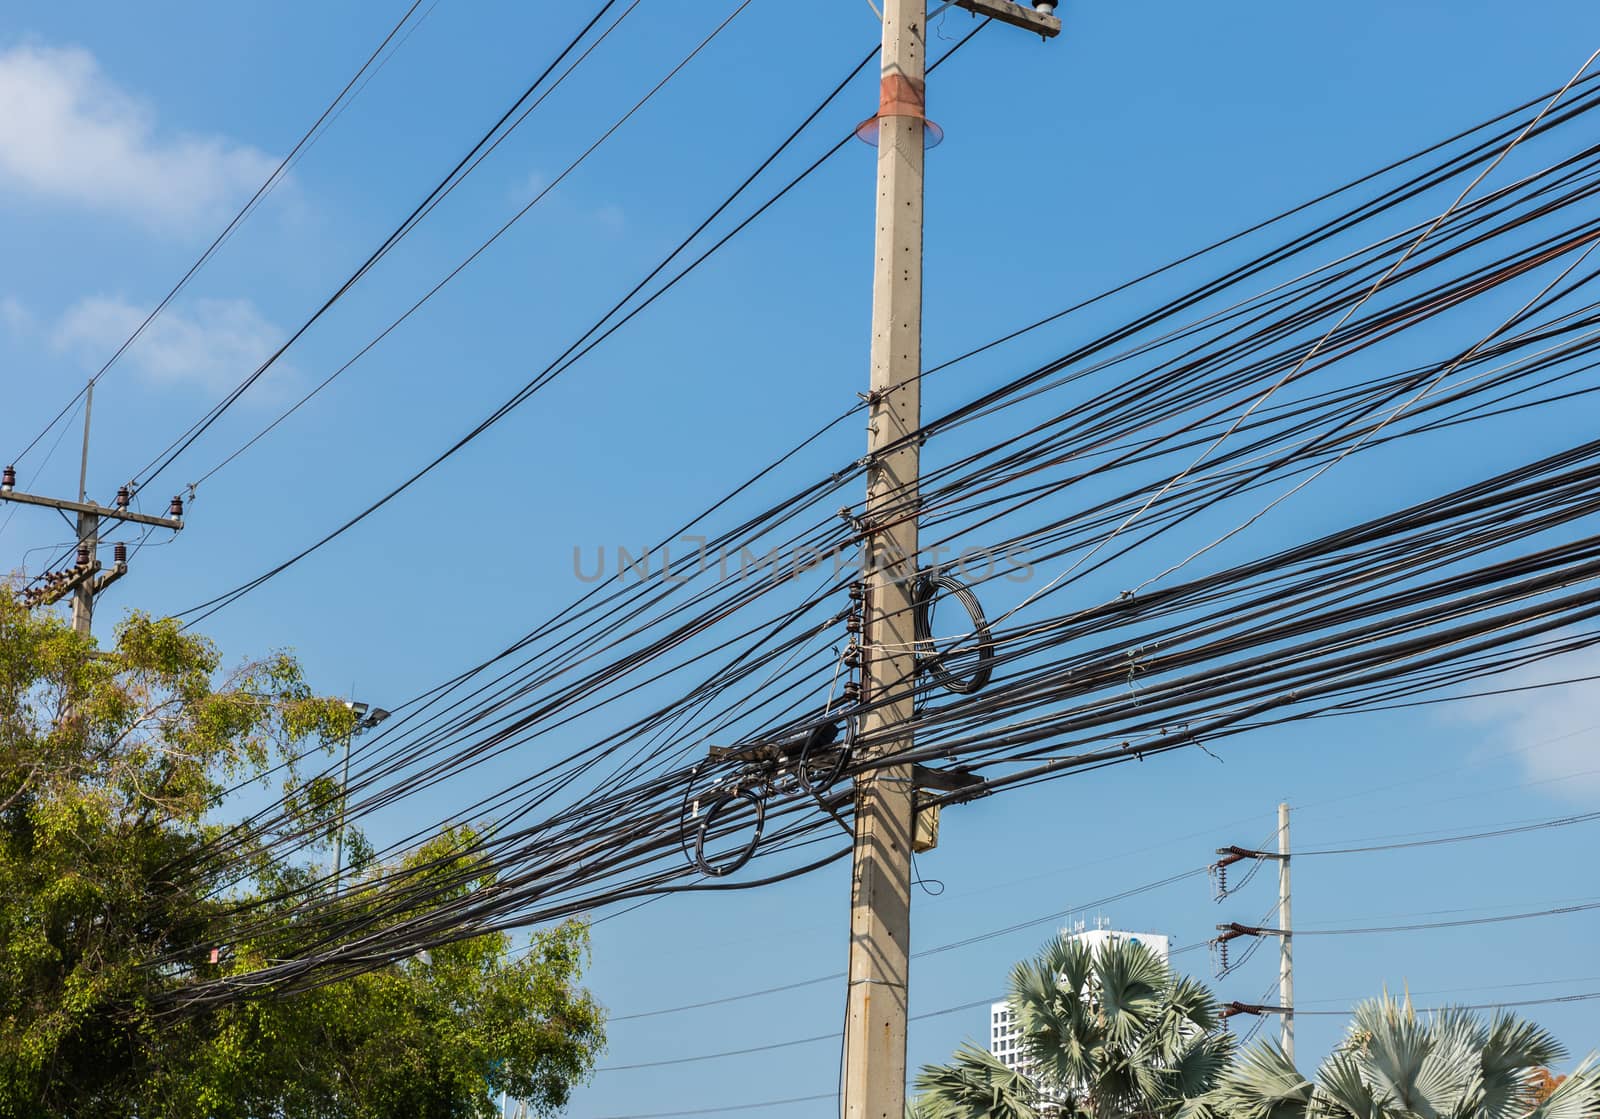 Electrical wires, Thailand by Mieszko9